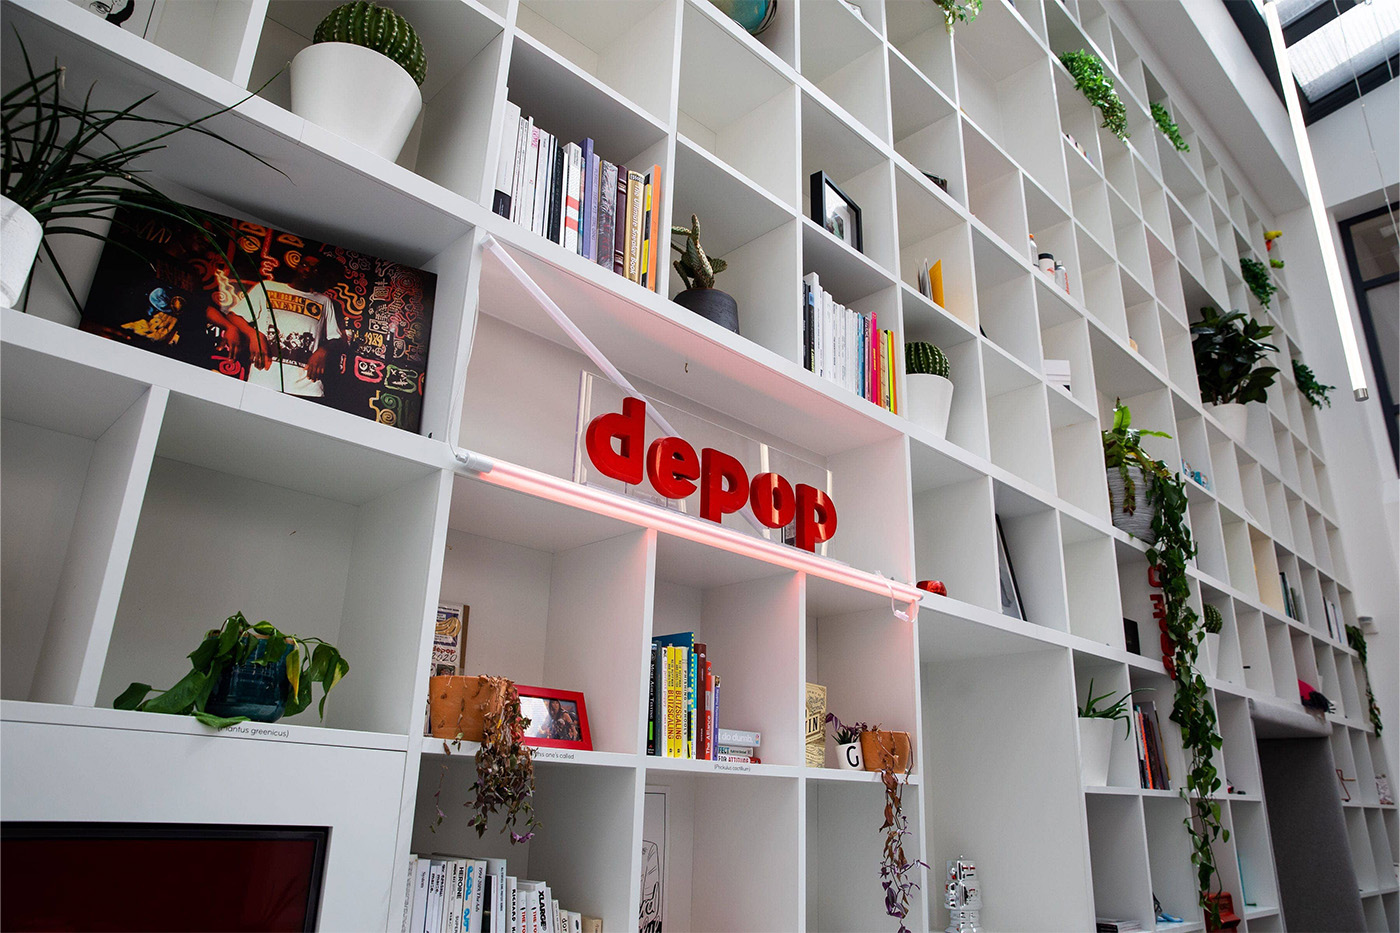 A bustling and unique shelving unit with a large 'depop' logo made from red plastic